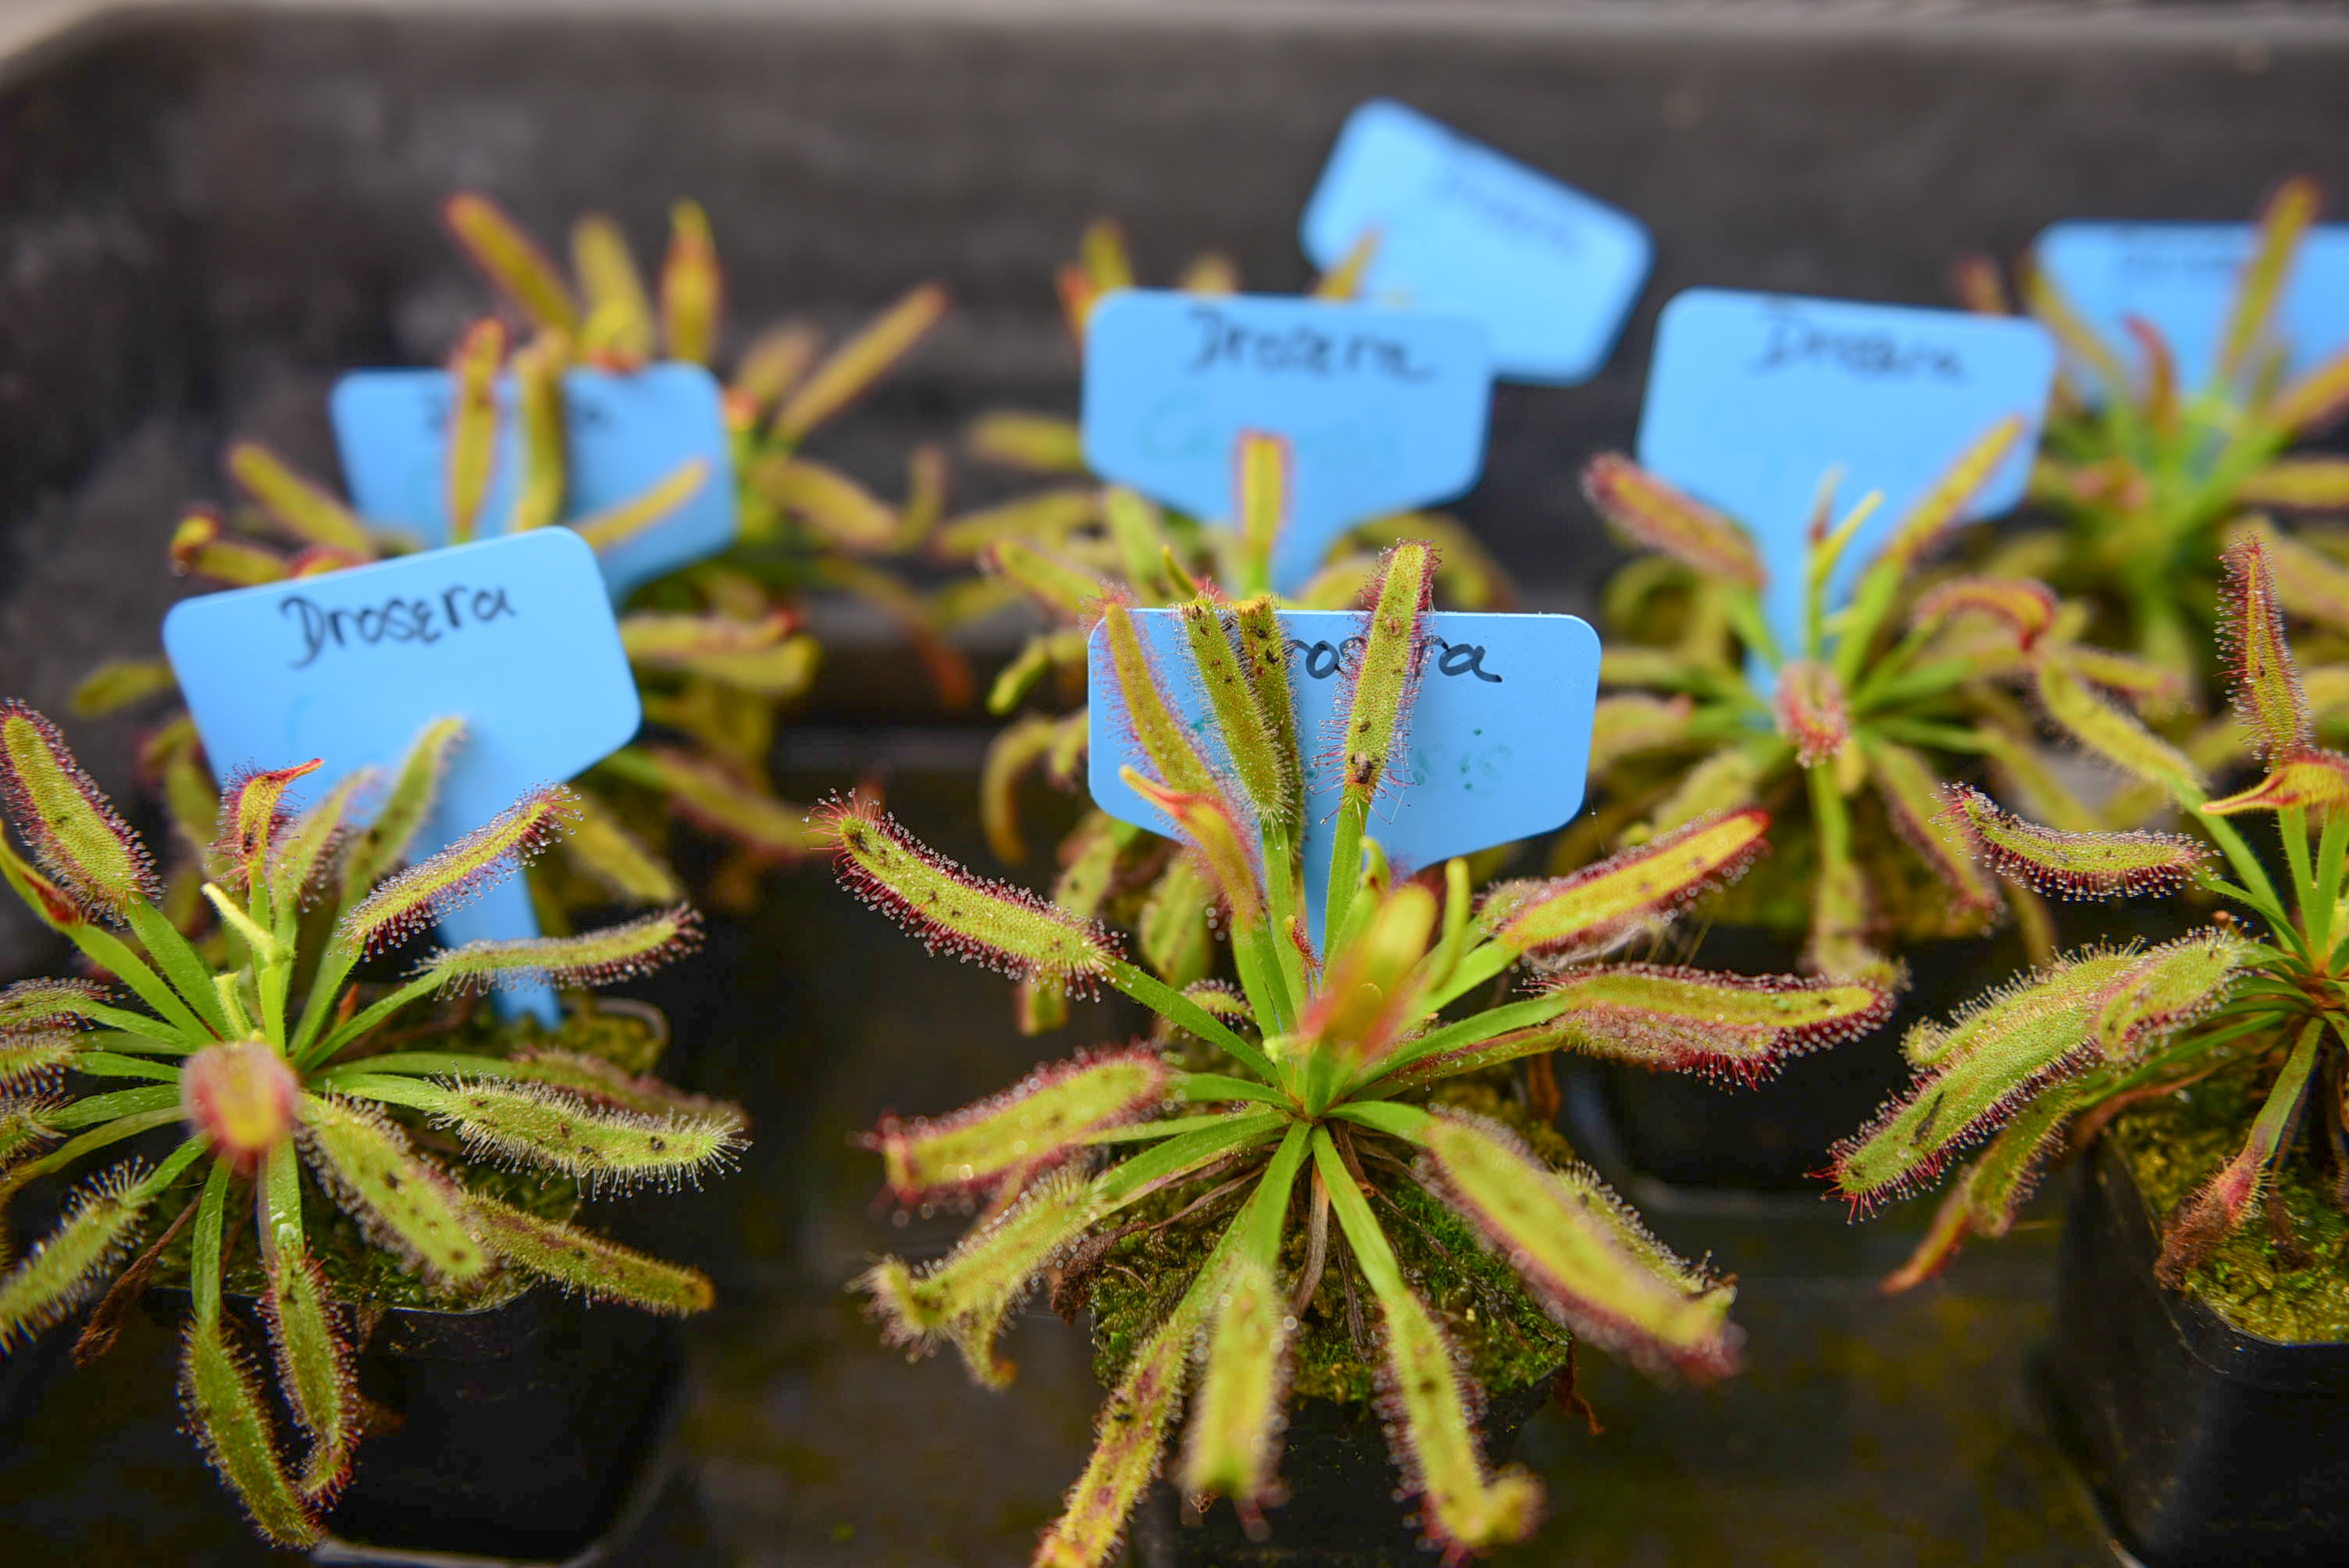 Cape sundews in Nguyen Thi Hong Thu’s garden in District 8, Ho Chi Minh City. Photo: Ngoc Phuong / Tuoi Tre News